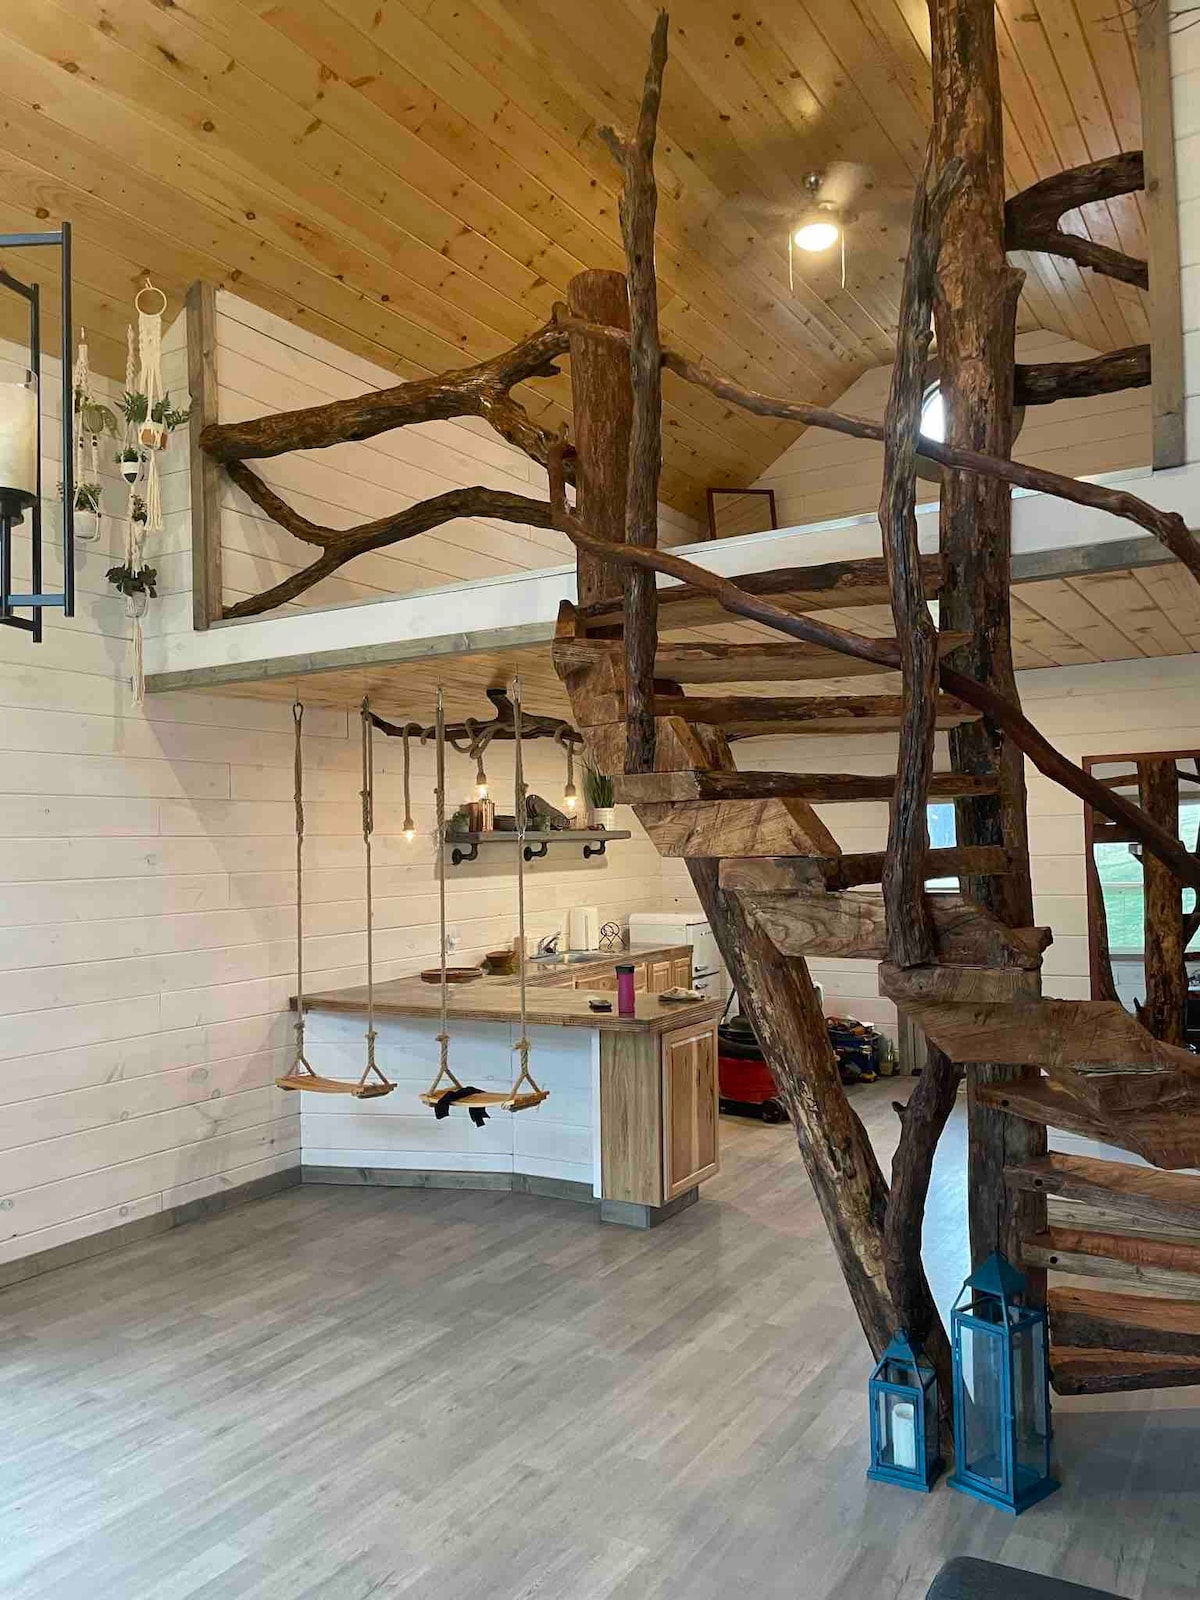 The Winery “Hang-over” Treehouse